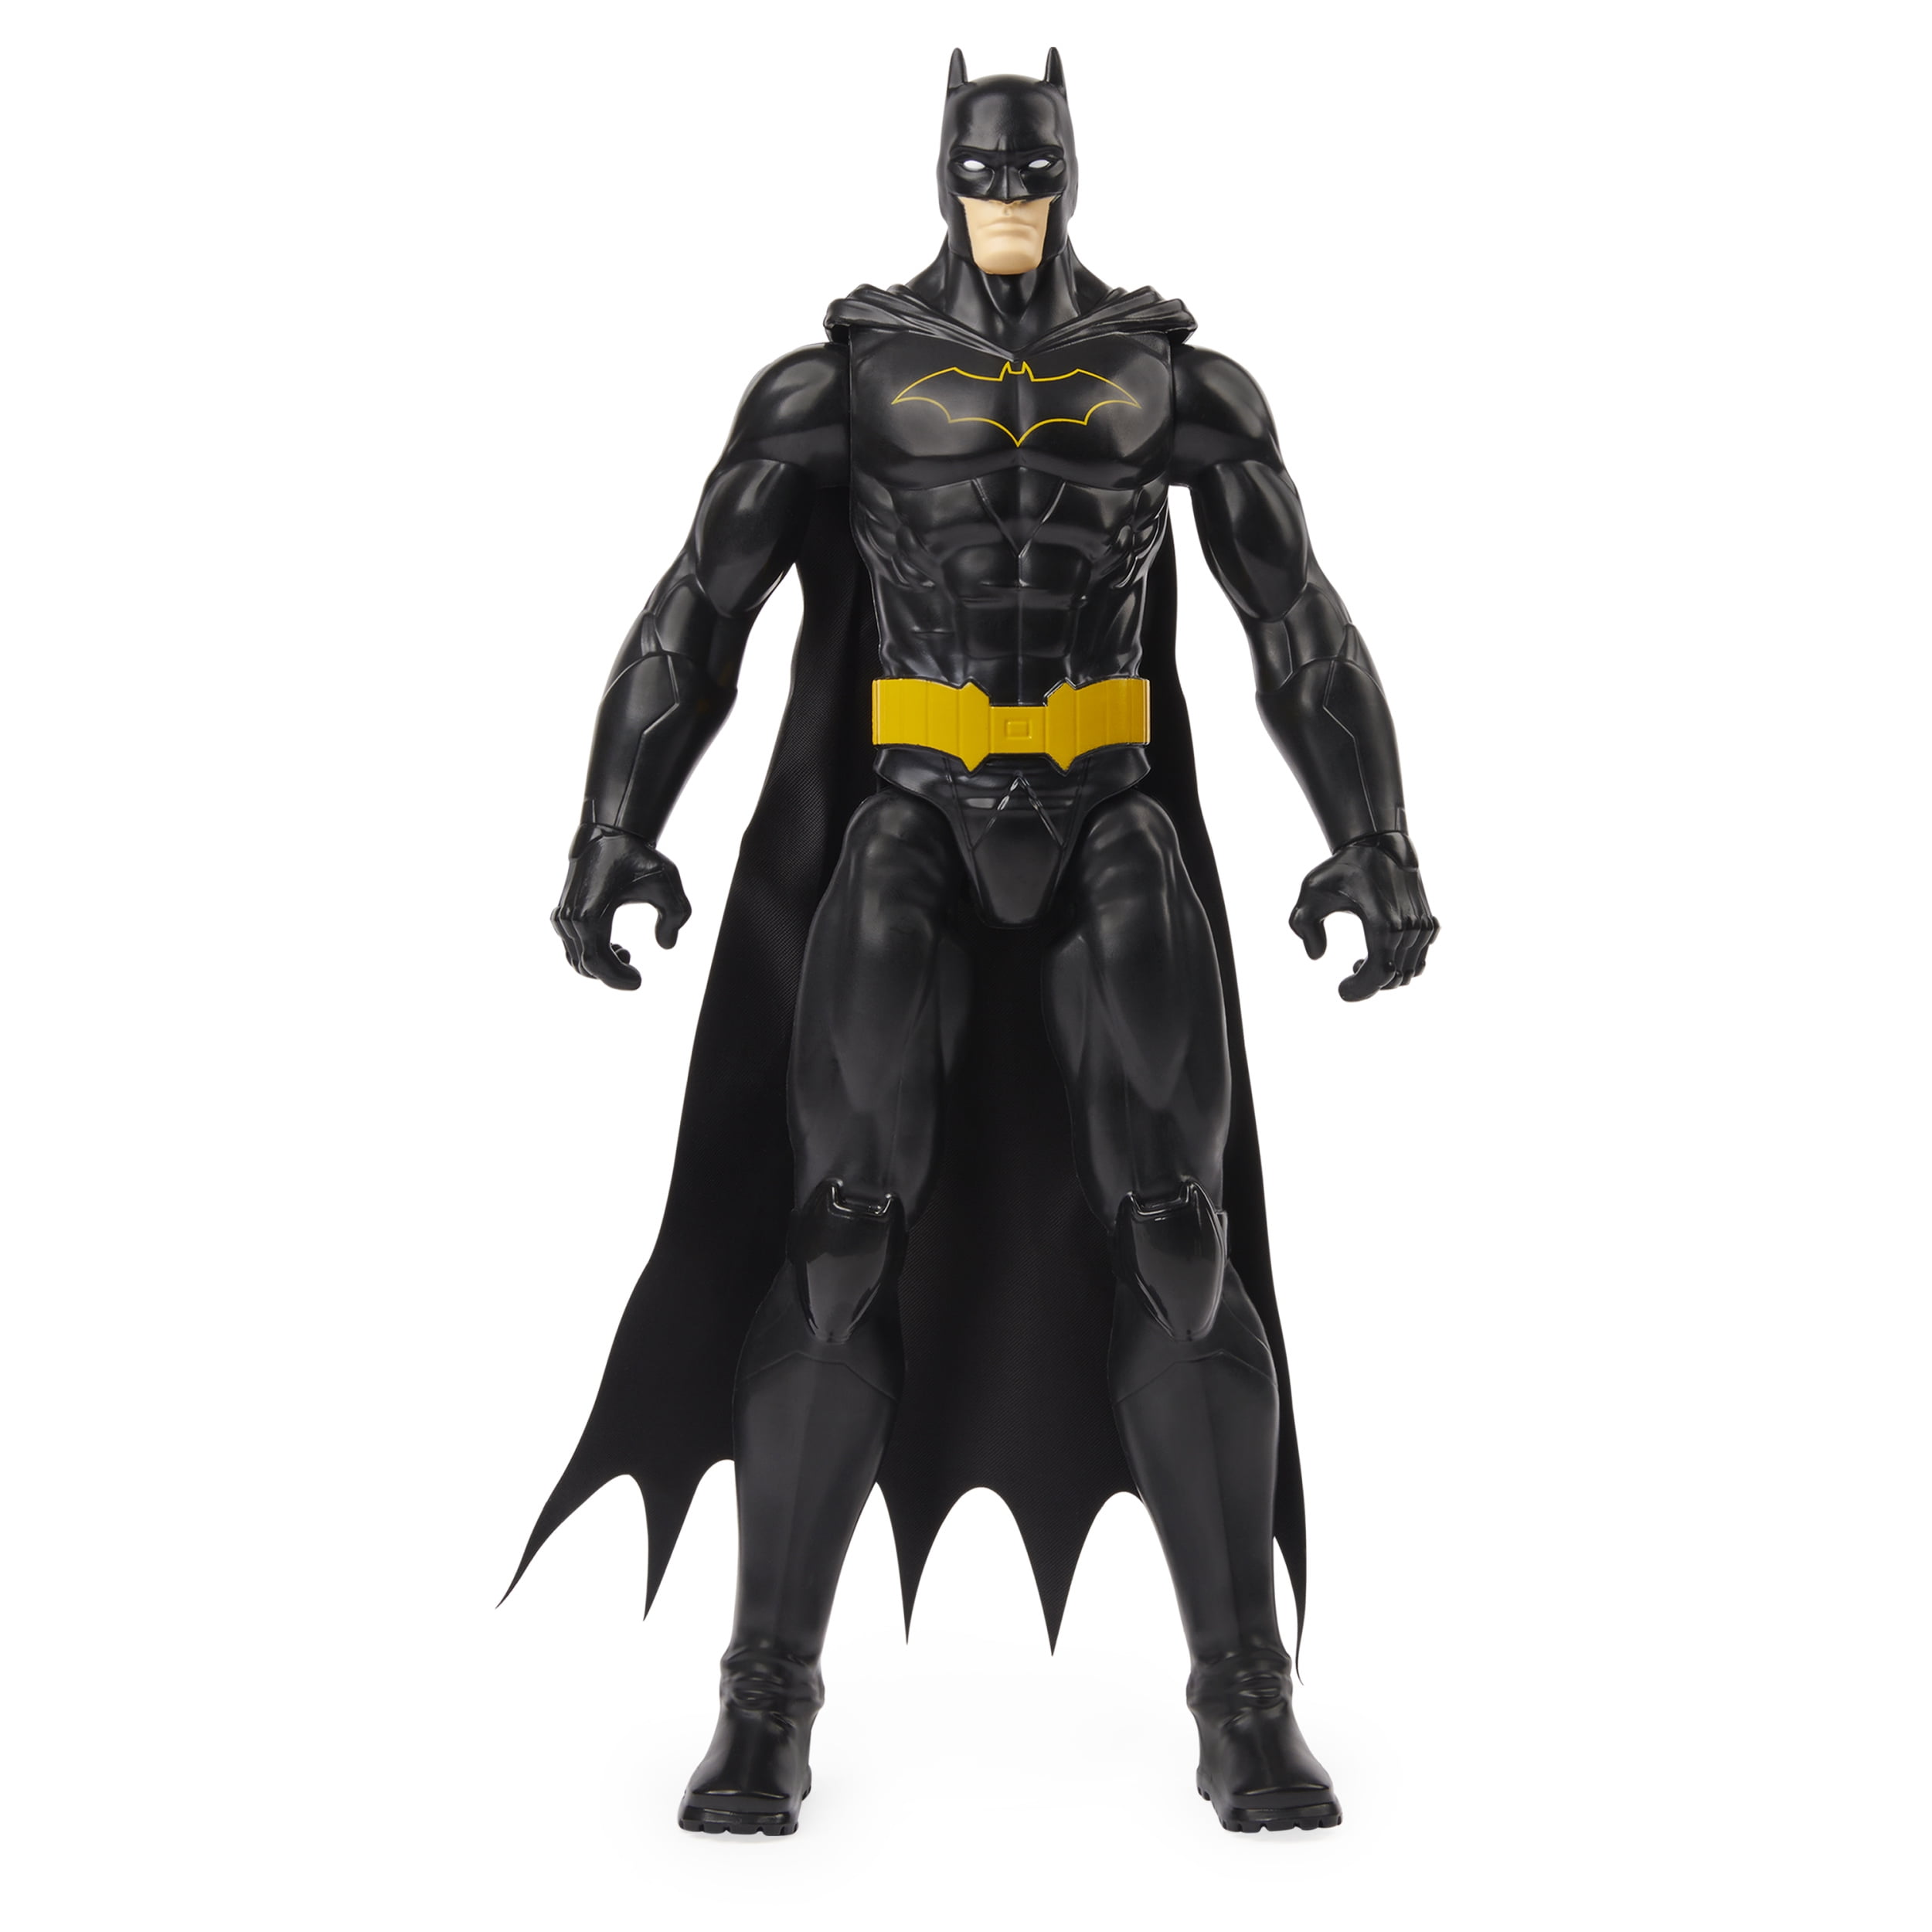 Batman 12-inch Action Figure (Black Suit), for Kids Aged 3 and up